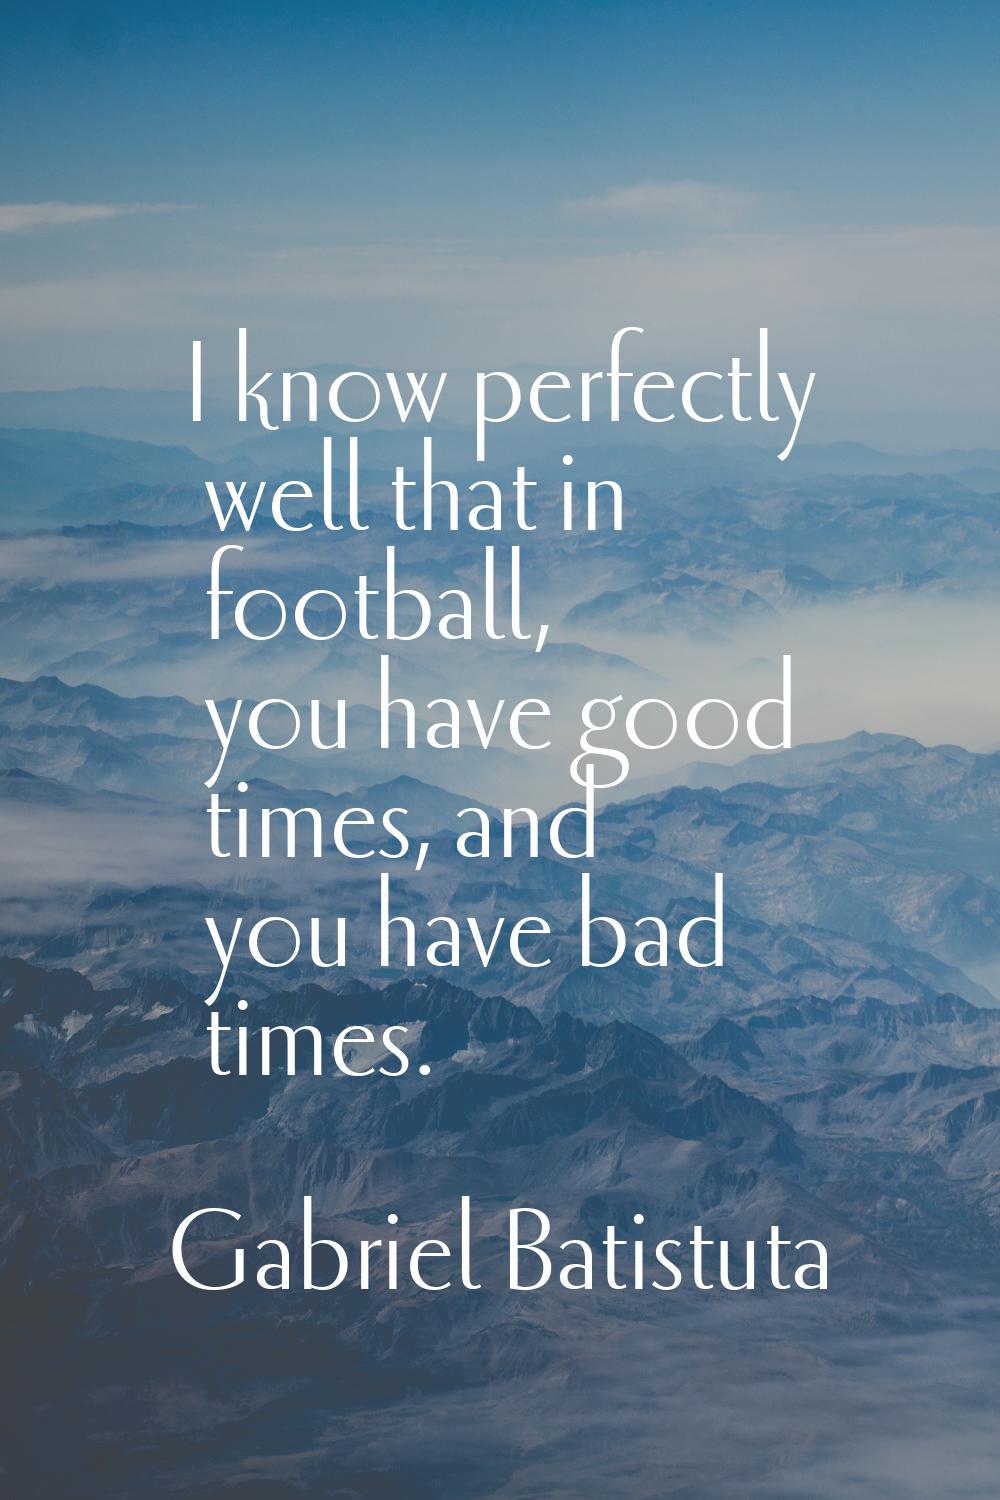 I know perfectly well that in football, you have good times, and you have bad times.